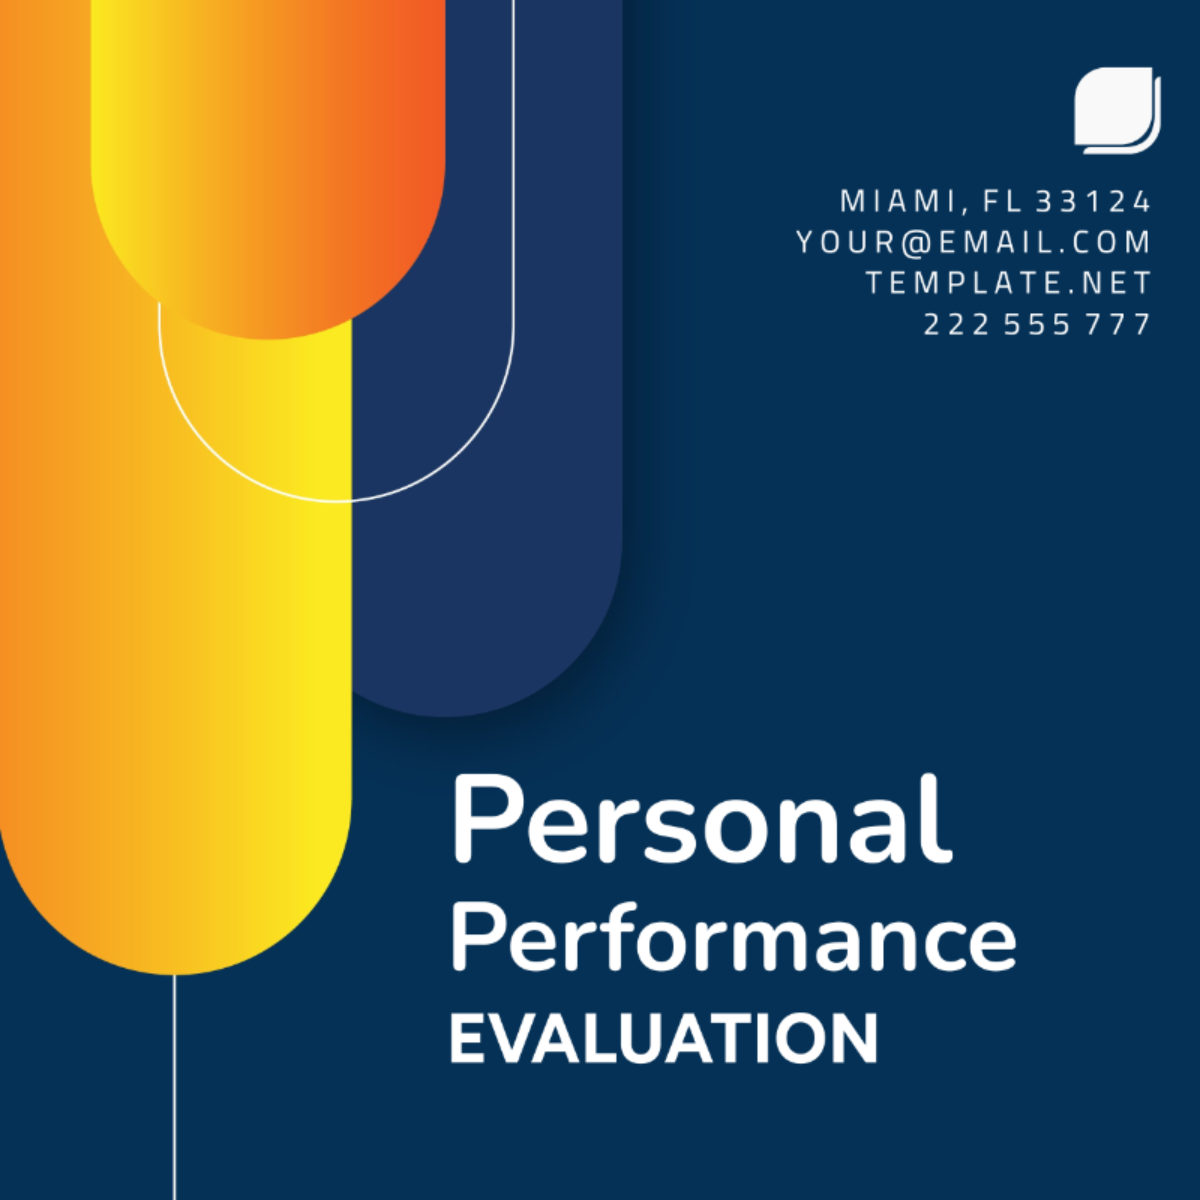 Personal Performance Evaluation Template